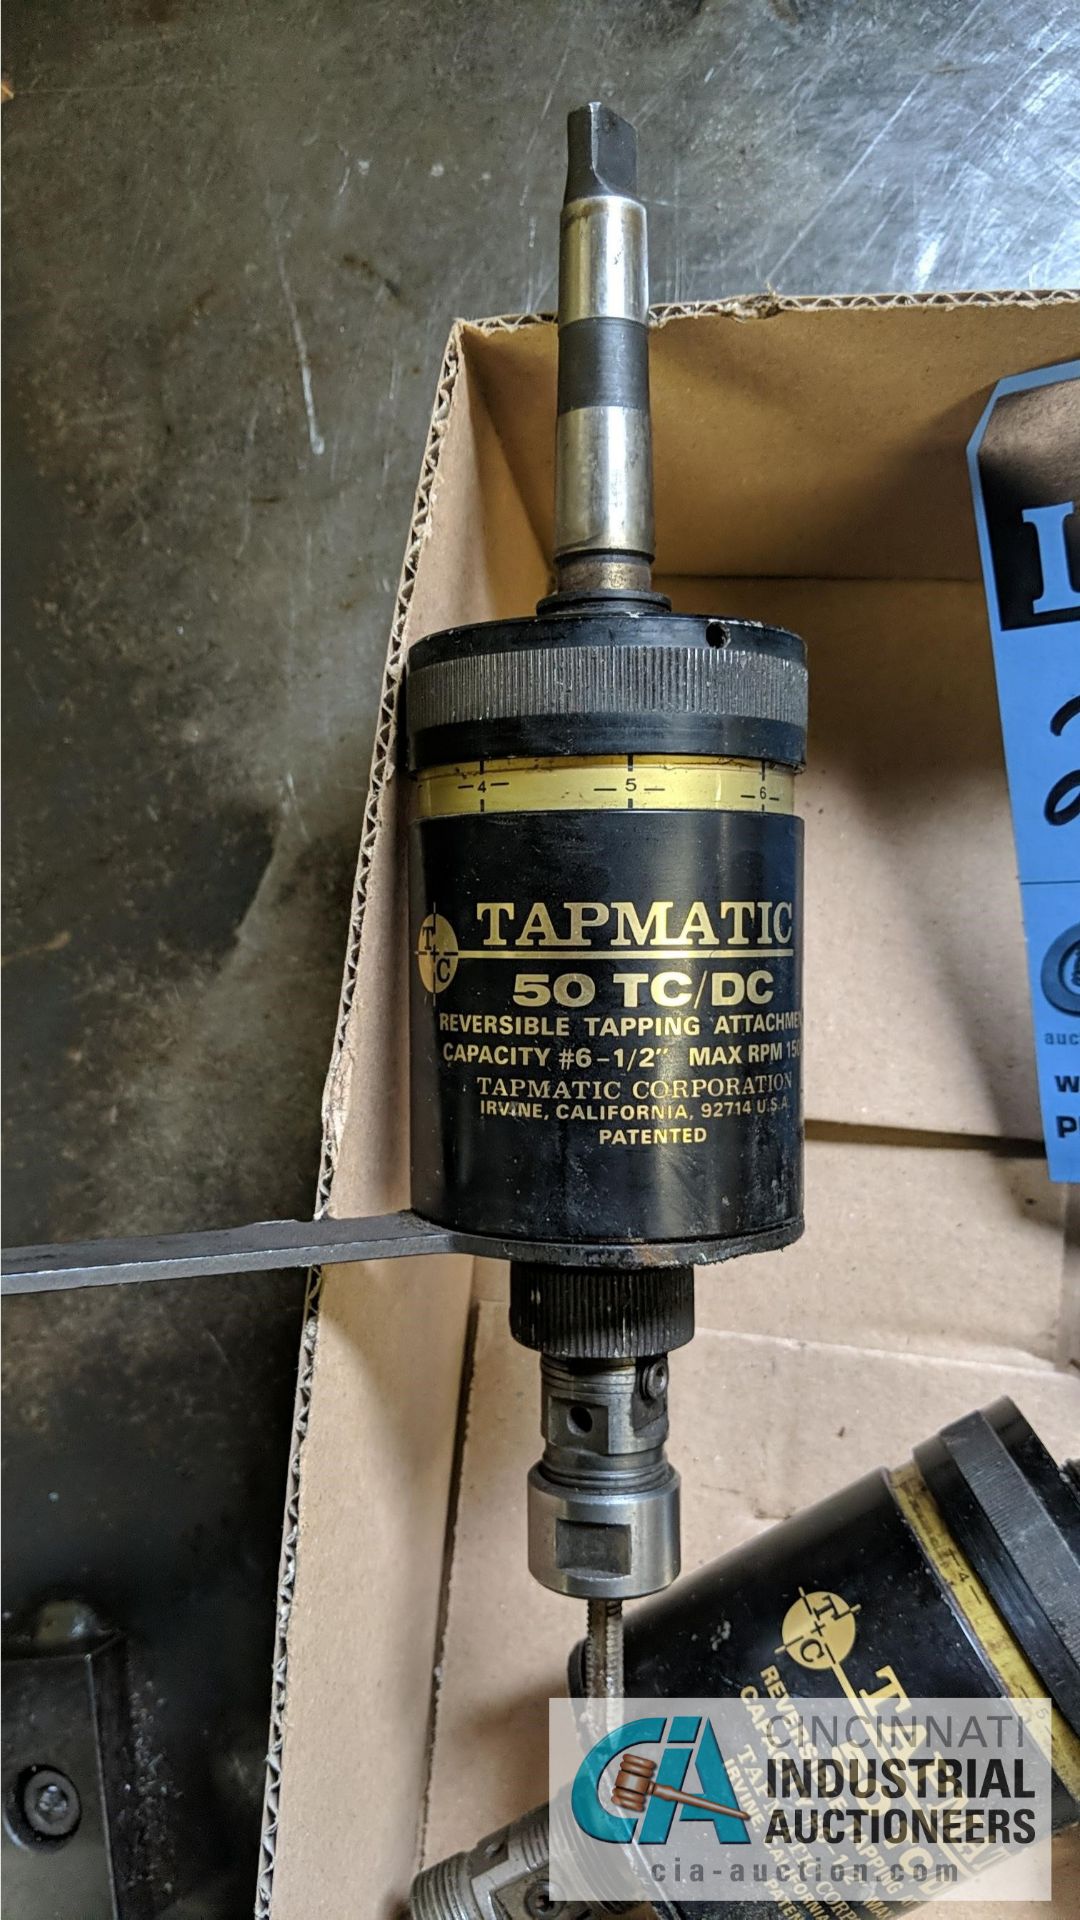 TAPMATIC NO. 50 TC/DC TAPPING HEADS - Image 2 of 3